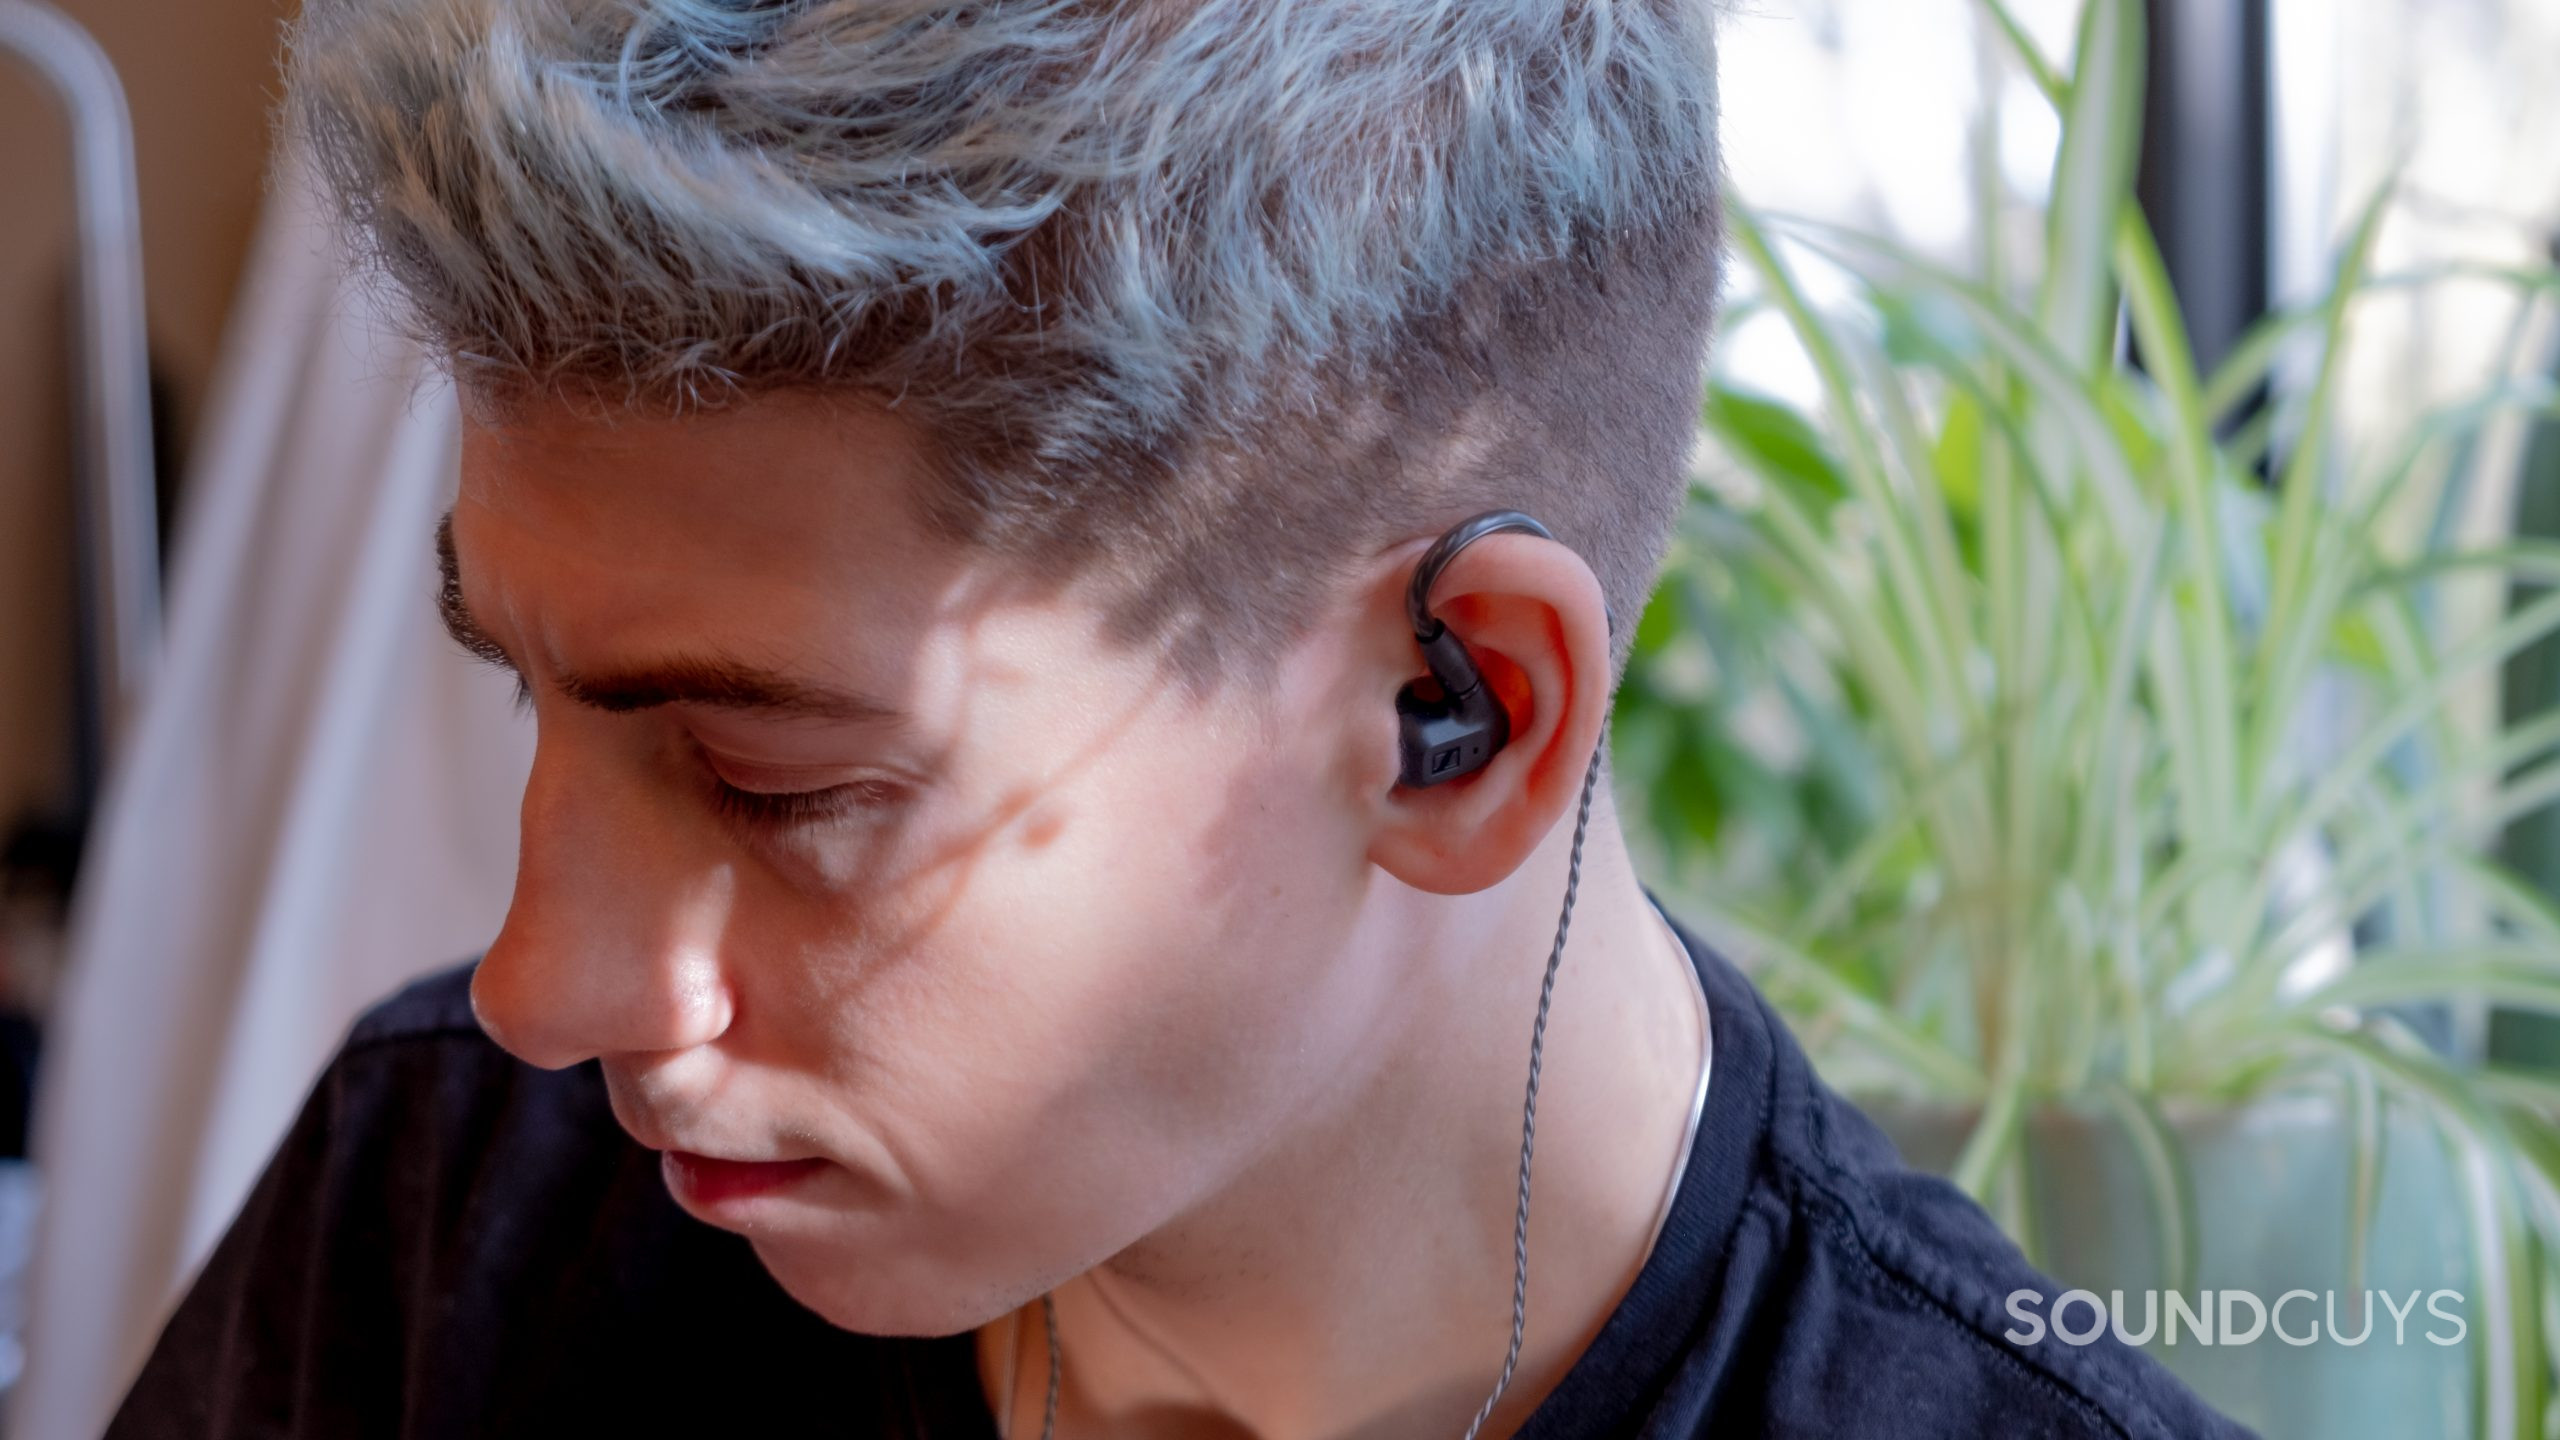 A man wears the Sennheiser IE 200 in ears with an aloe plant in the background.